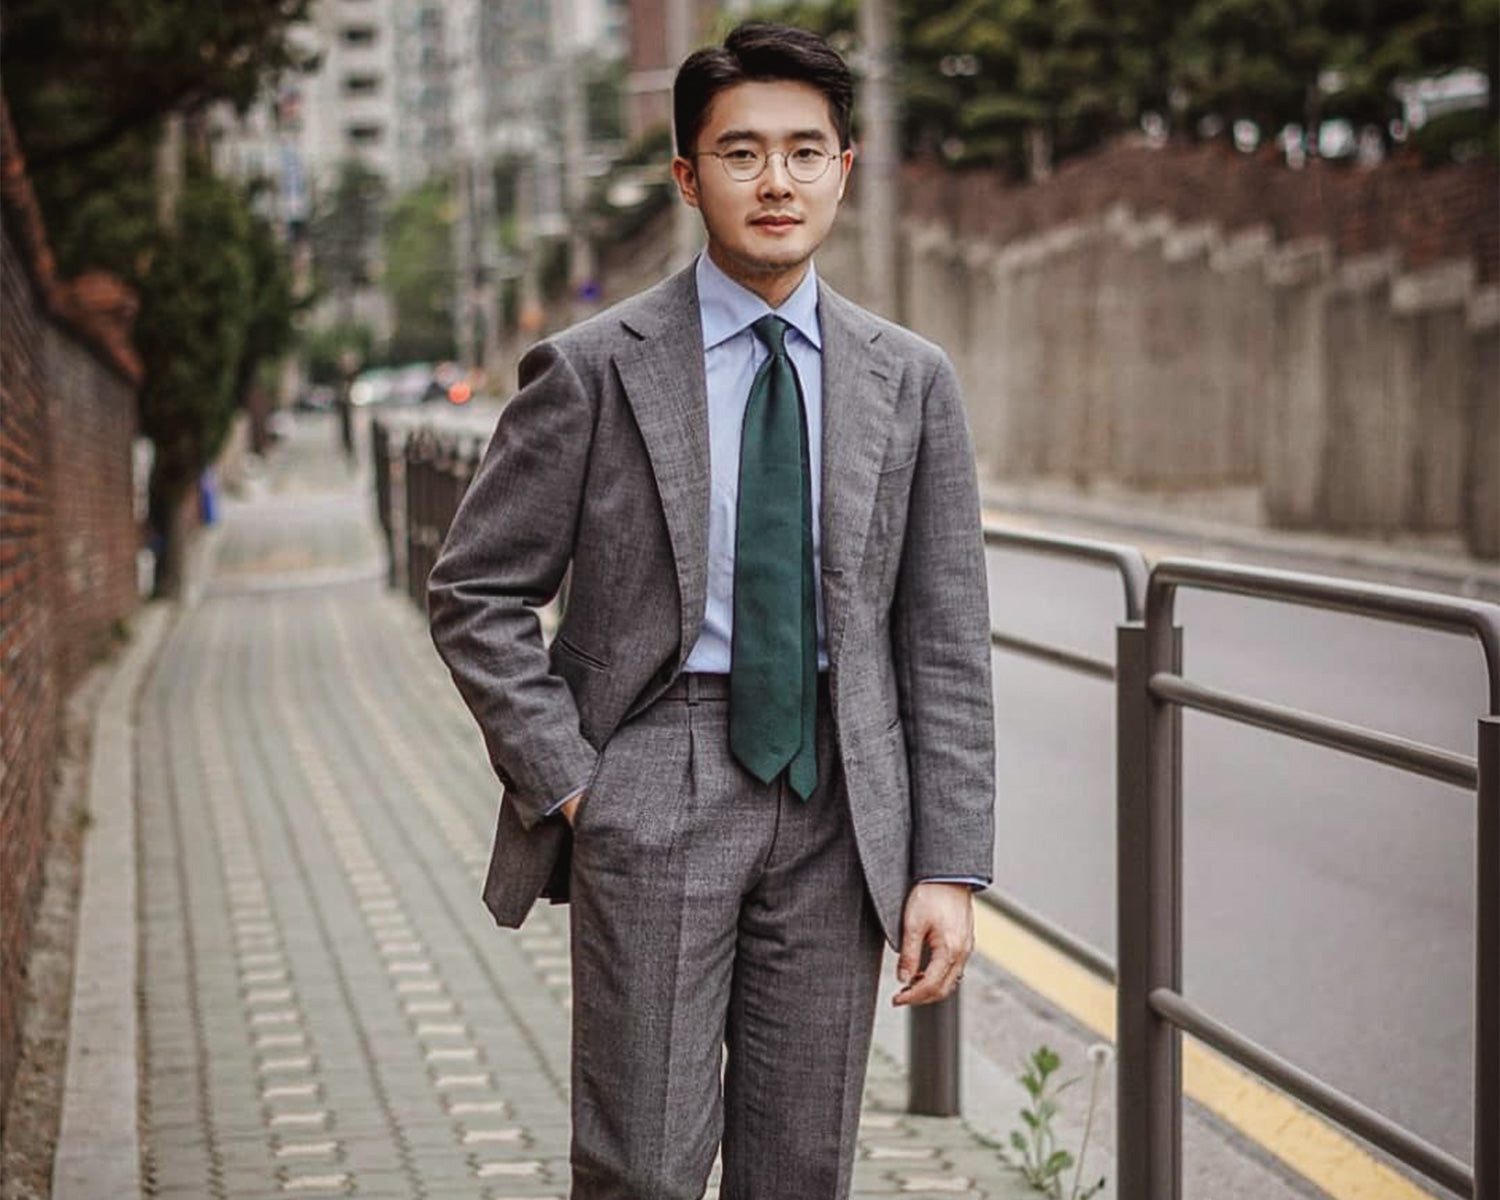 MQLee wearing a grey suit with green tie